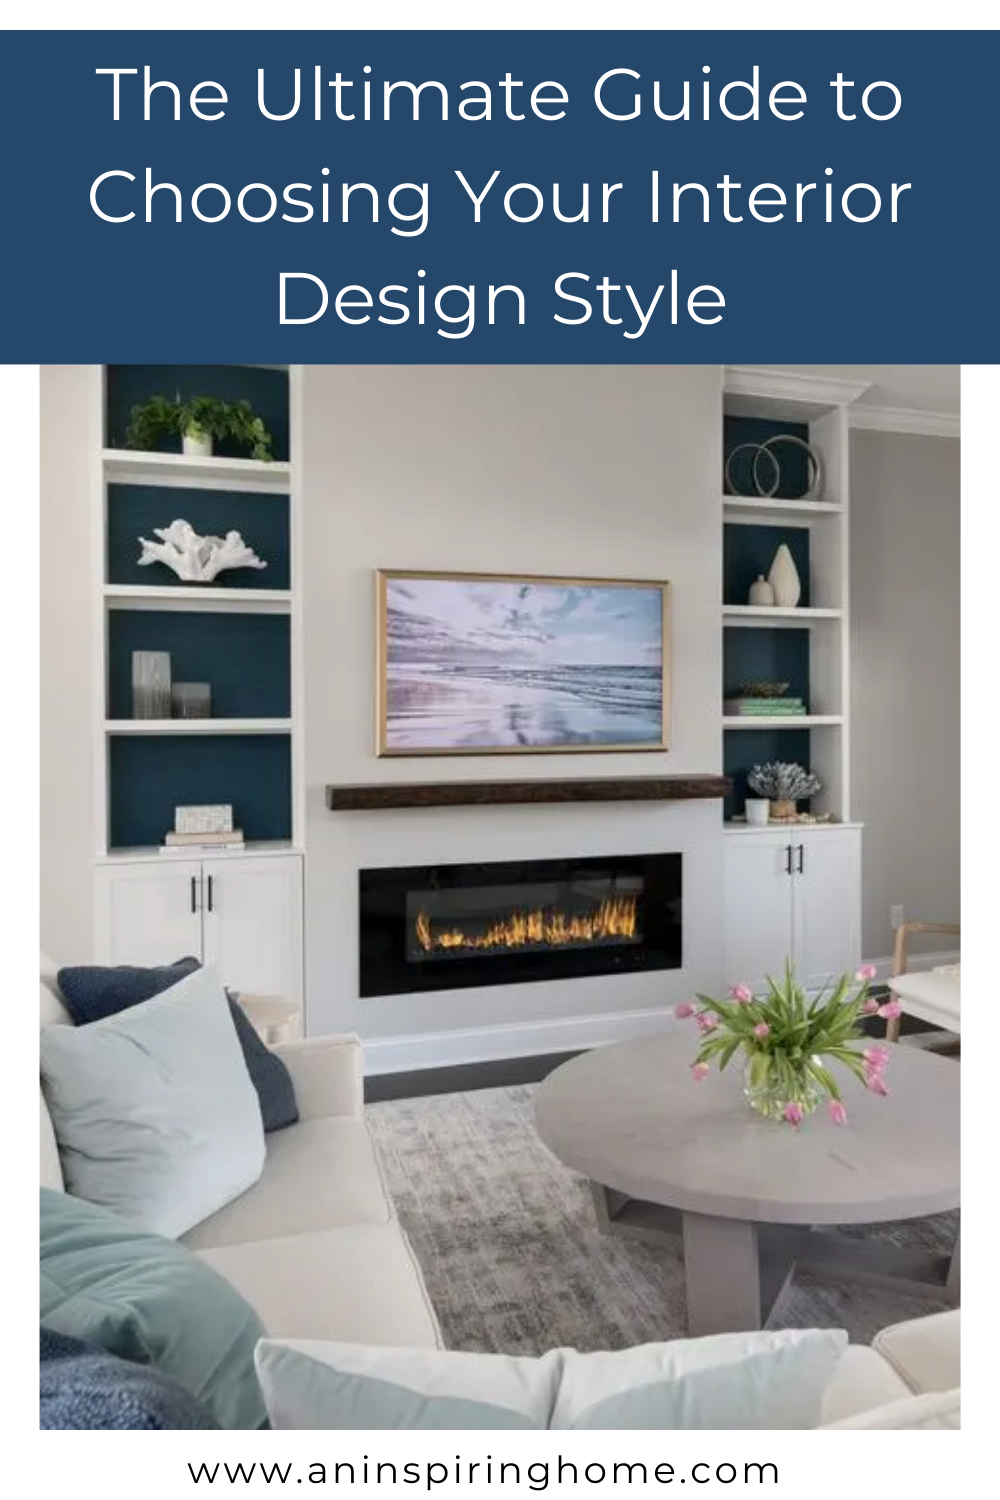 The Ultimate Guide to Choosing Your Interior Design Style